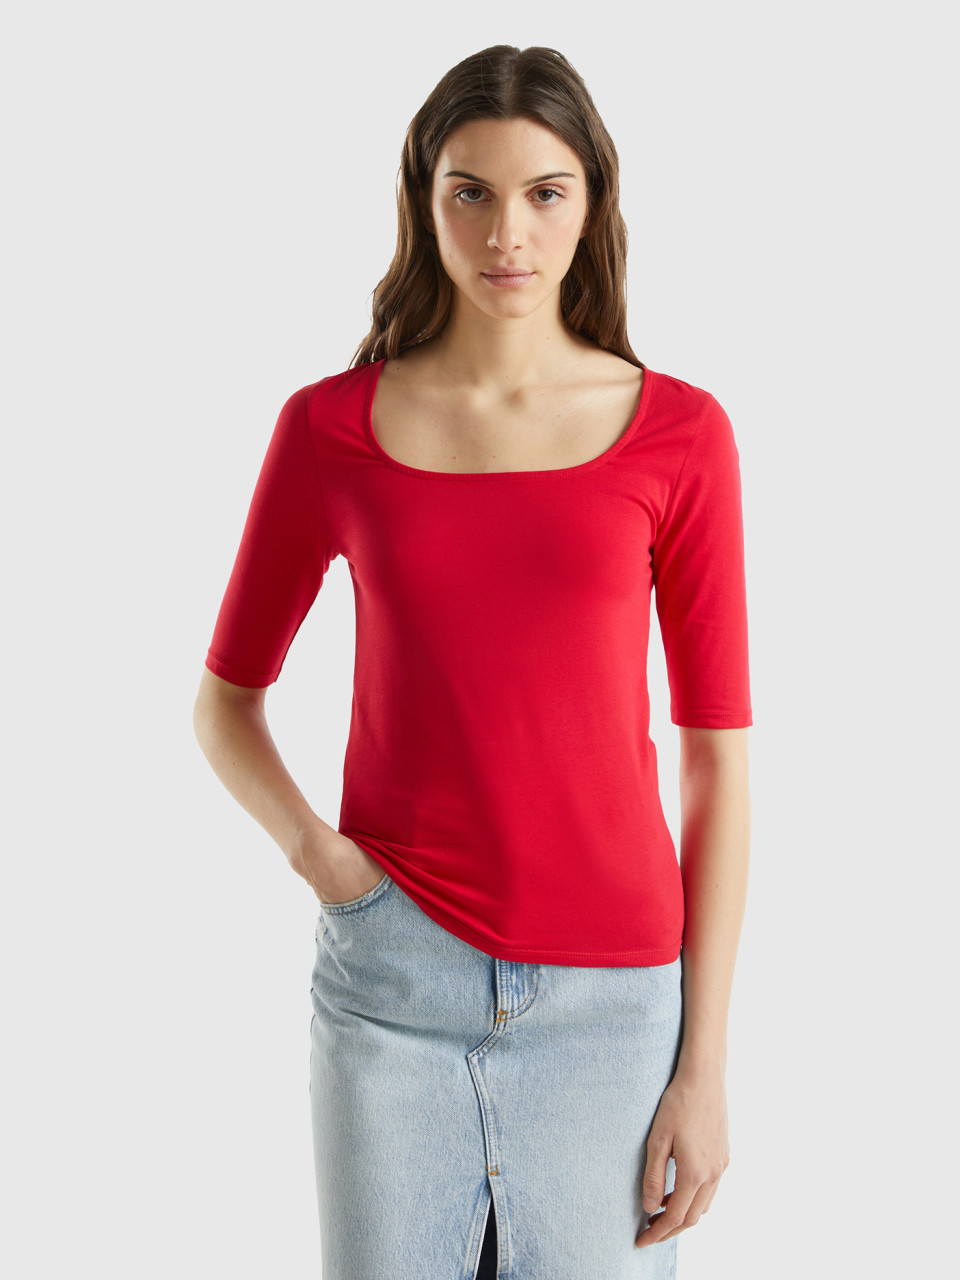 Benetton, Fitted Stretch Cotton T-shirt, Red, Women